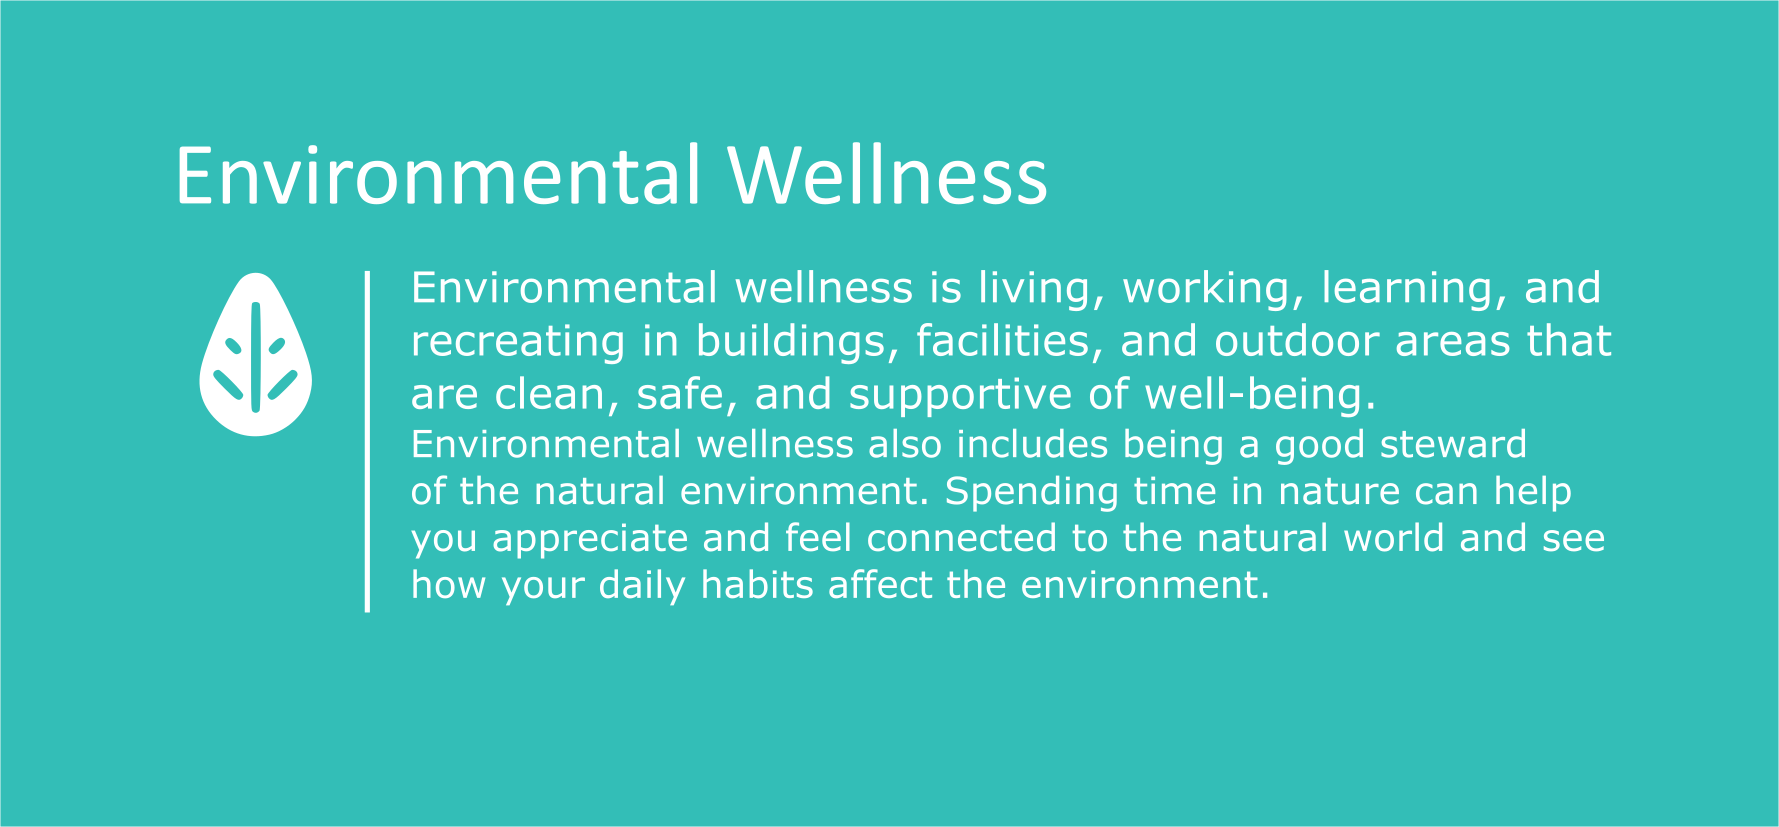 Environmental wellness is living, working, learning, and recreating in buildings, facilities, and outdoor areas that are clean, safe and supportive of well-being. Environmental Wellness also includes being a good steward of the natural environment. Spending time in nature can help you appreciate and feel connected to the natural world and see how your daily habits affect the environment.